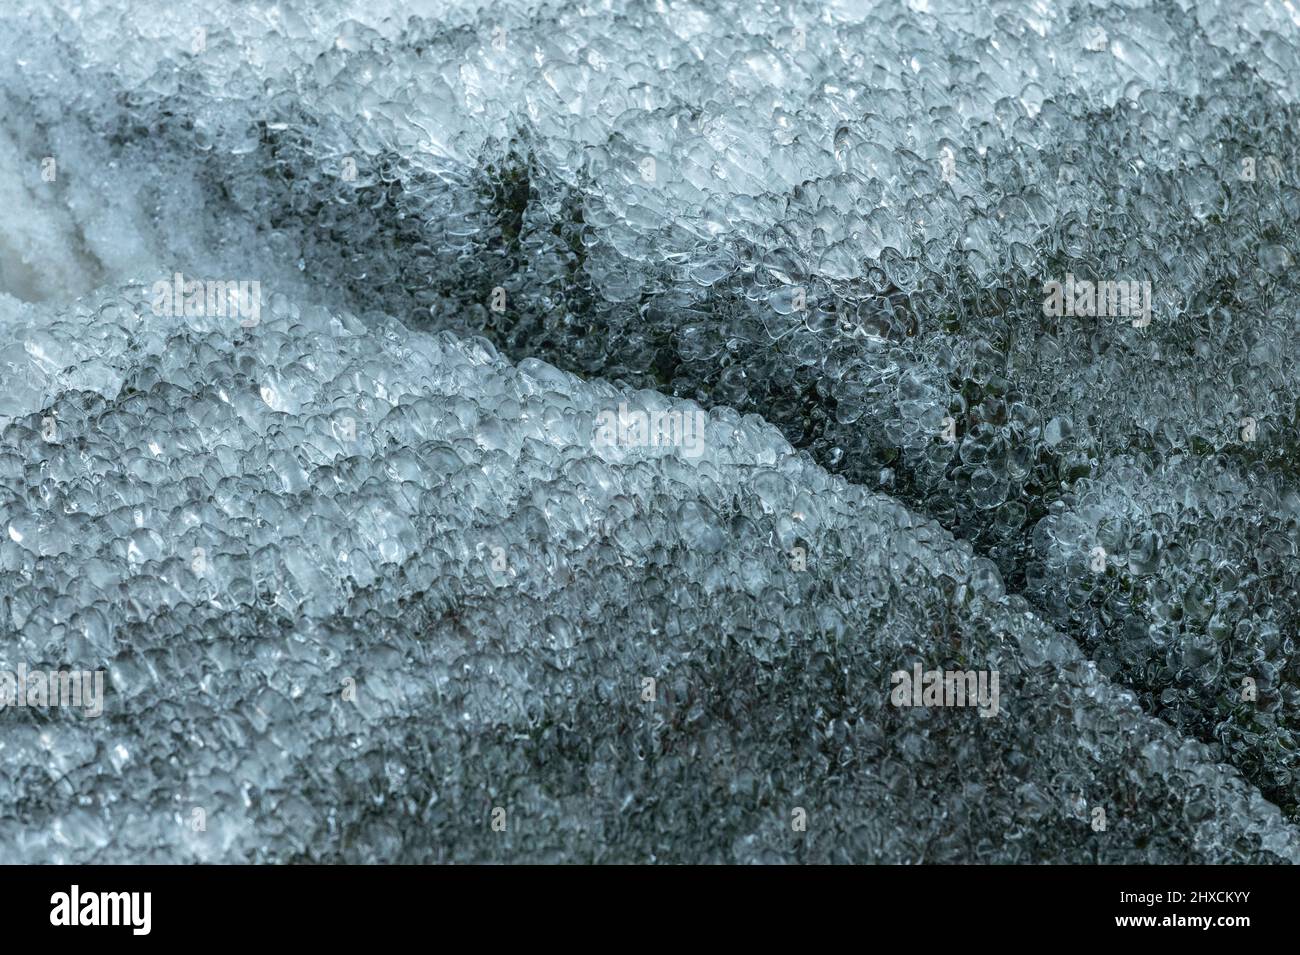 Stone with many ice crystals, Torup, Halland, Sweden Stock Photo